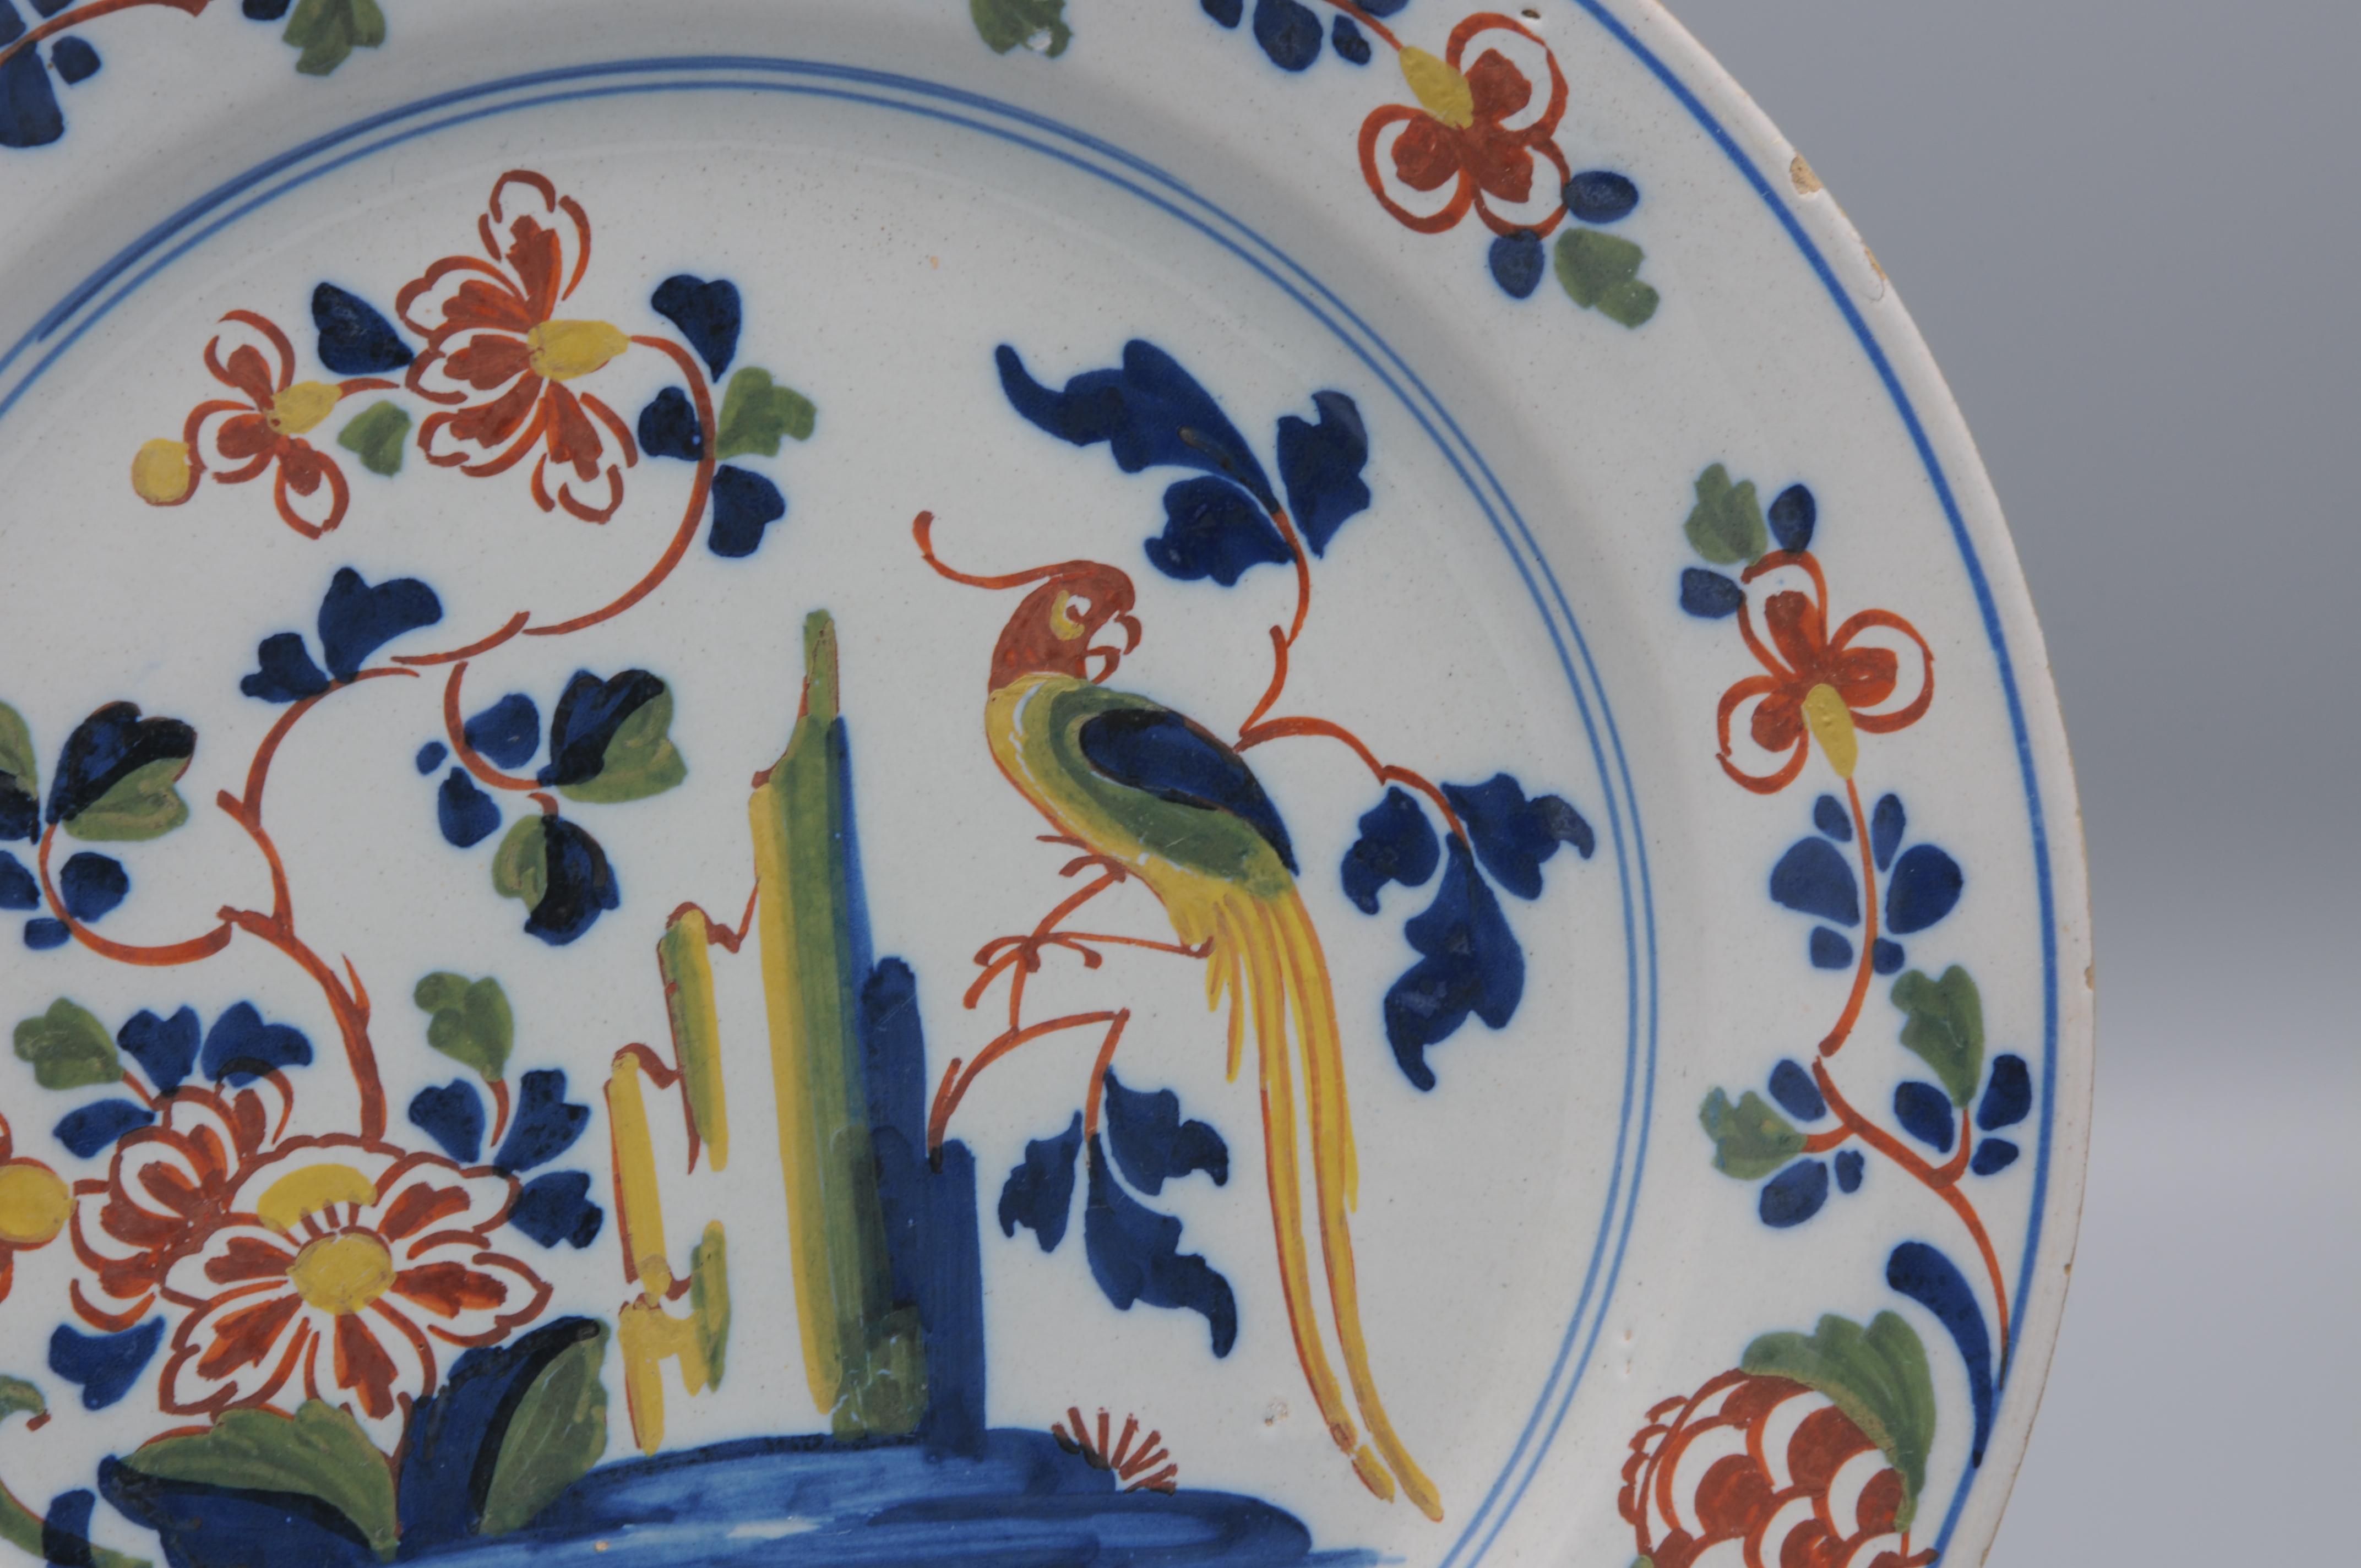 Chinoiserie Lambeth London - English Delftware Parrot Plate, mid 18th century